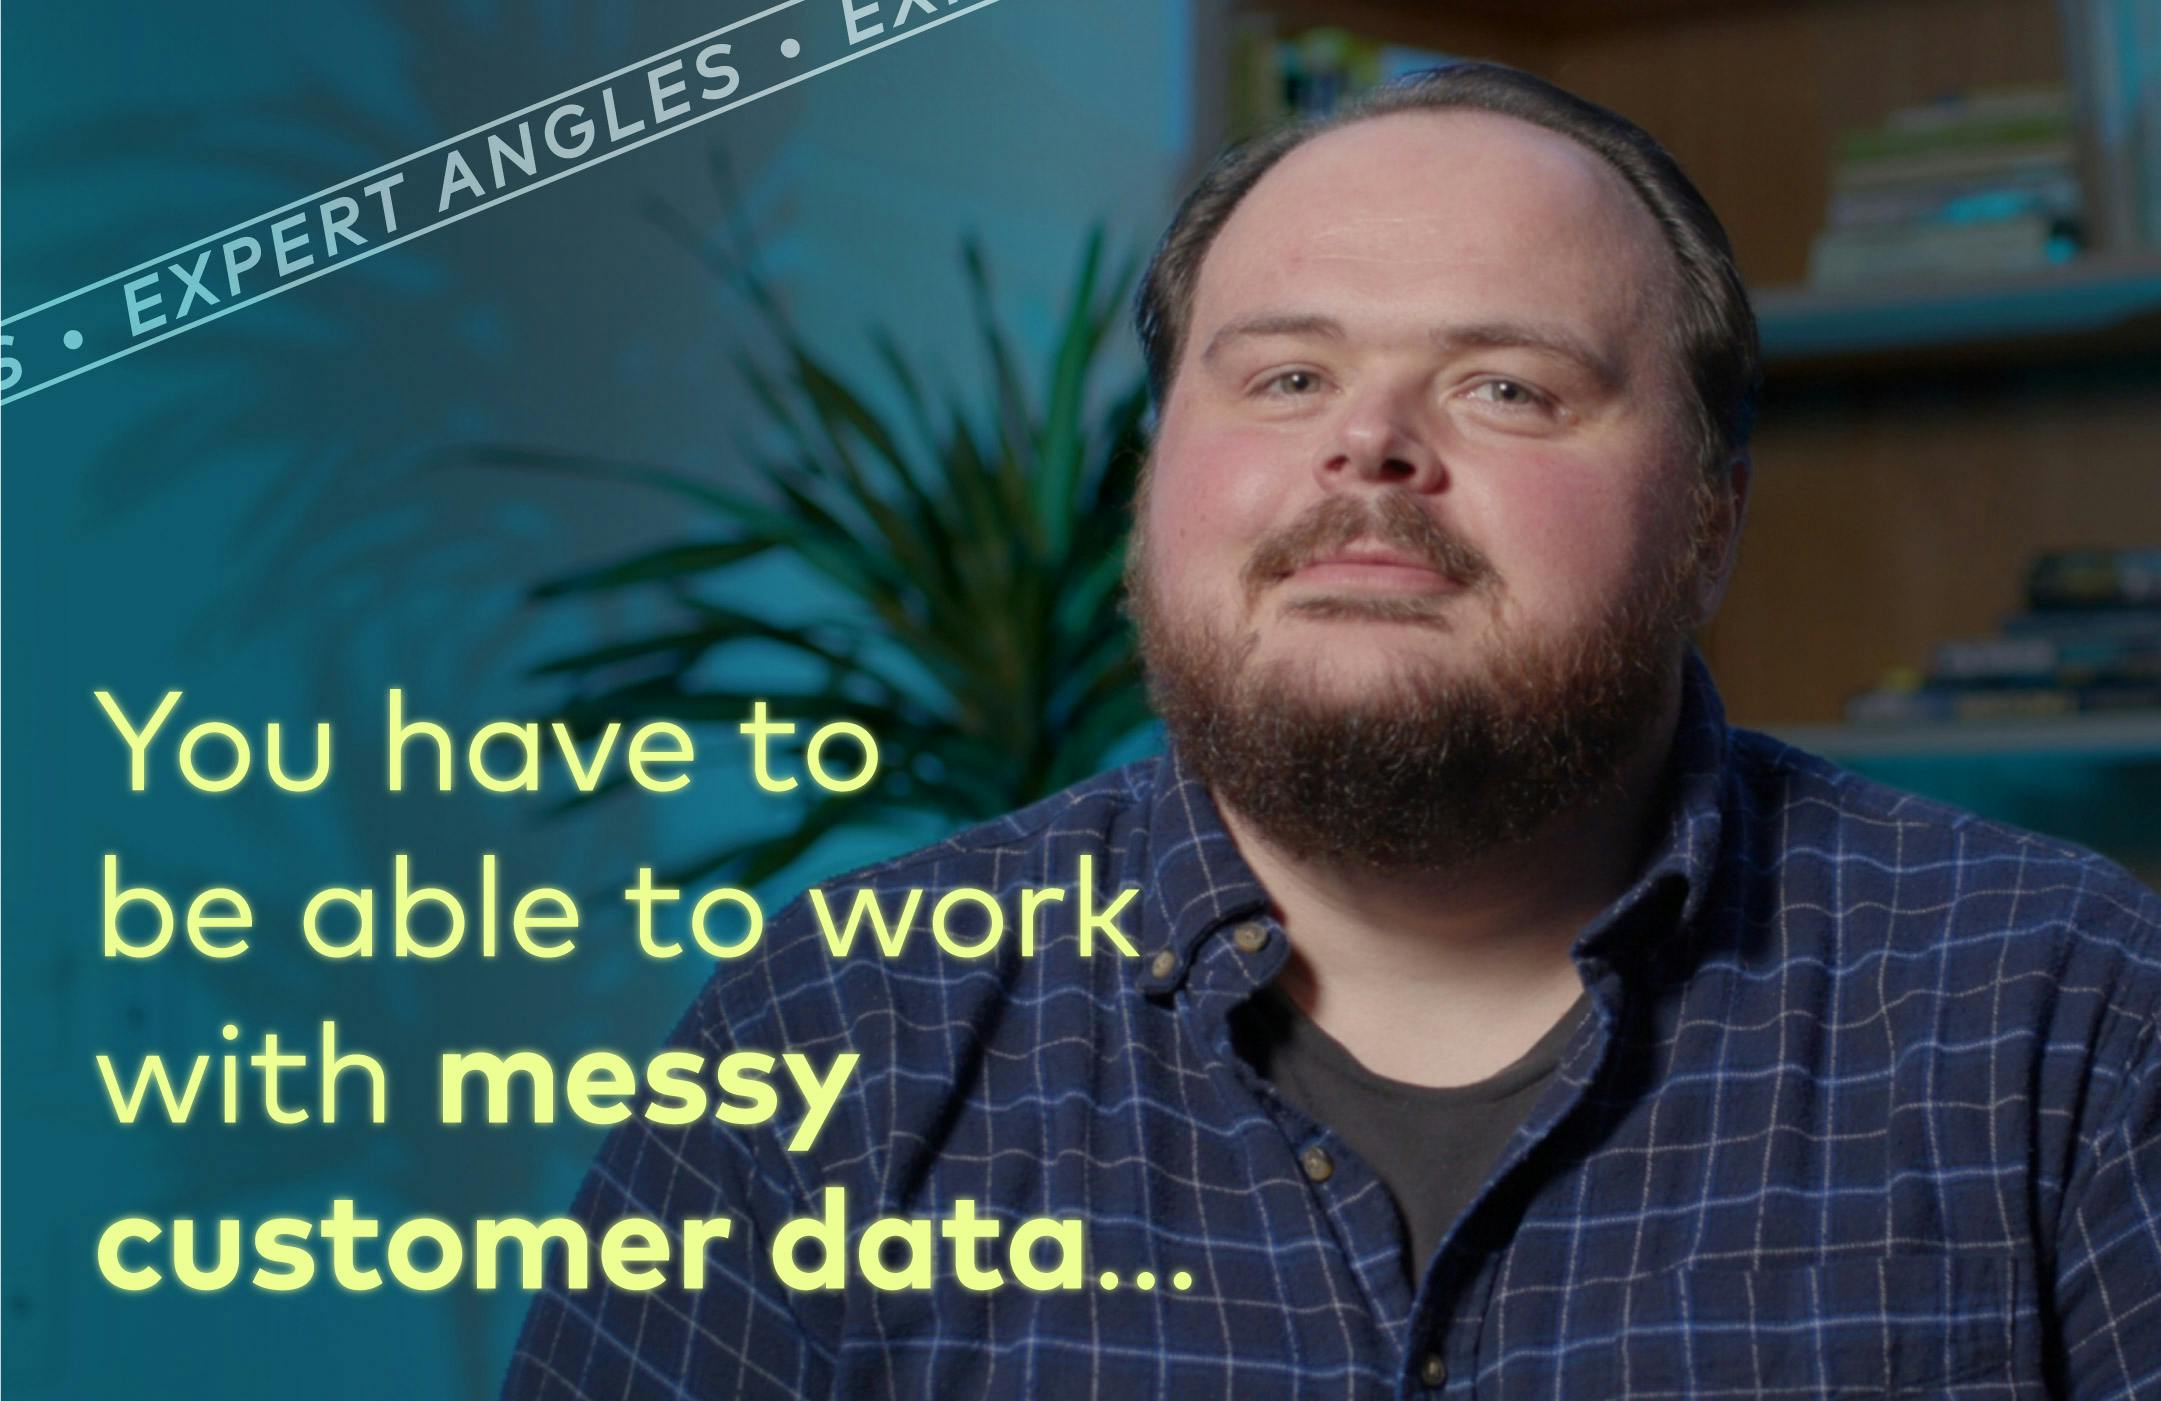 You have to be able to work with messy customer data...